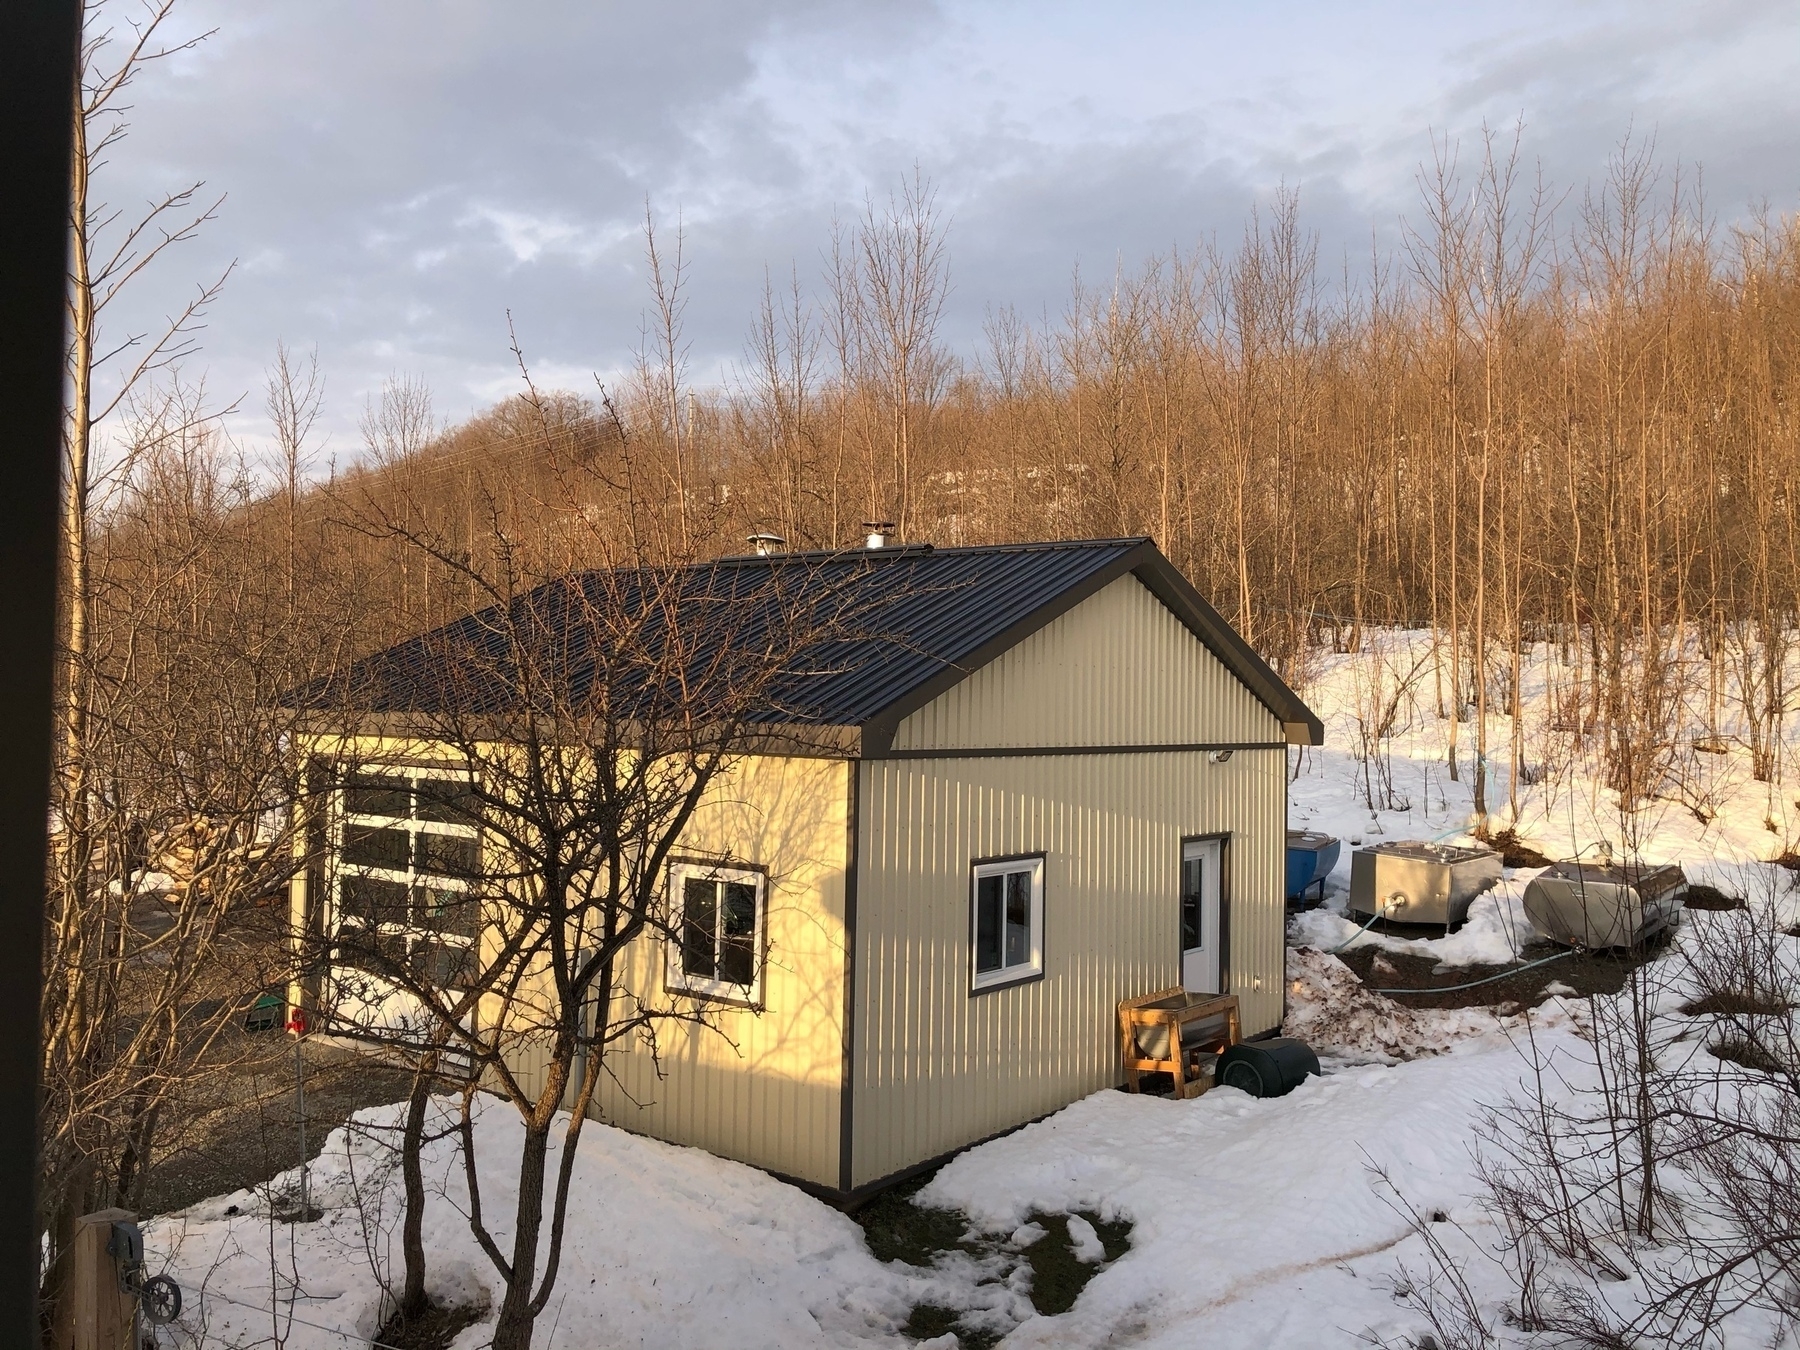 small building surrounded by snow and bare ground. there are stainless steel tanks behind. the hillsode behind is covered in trees